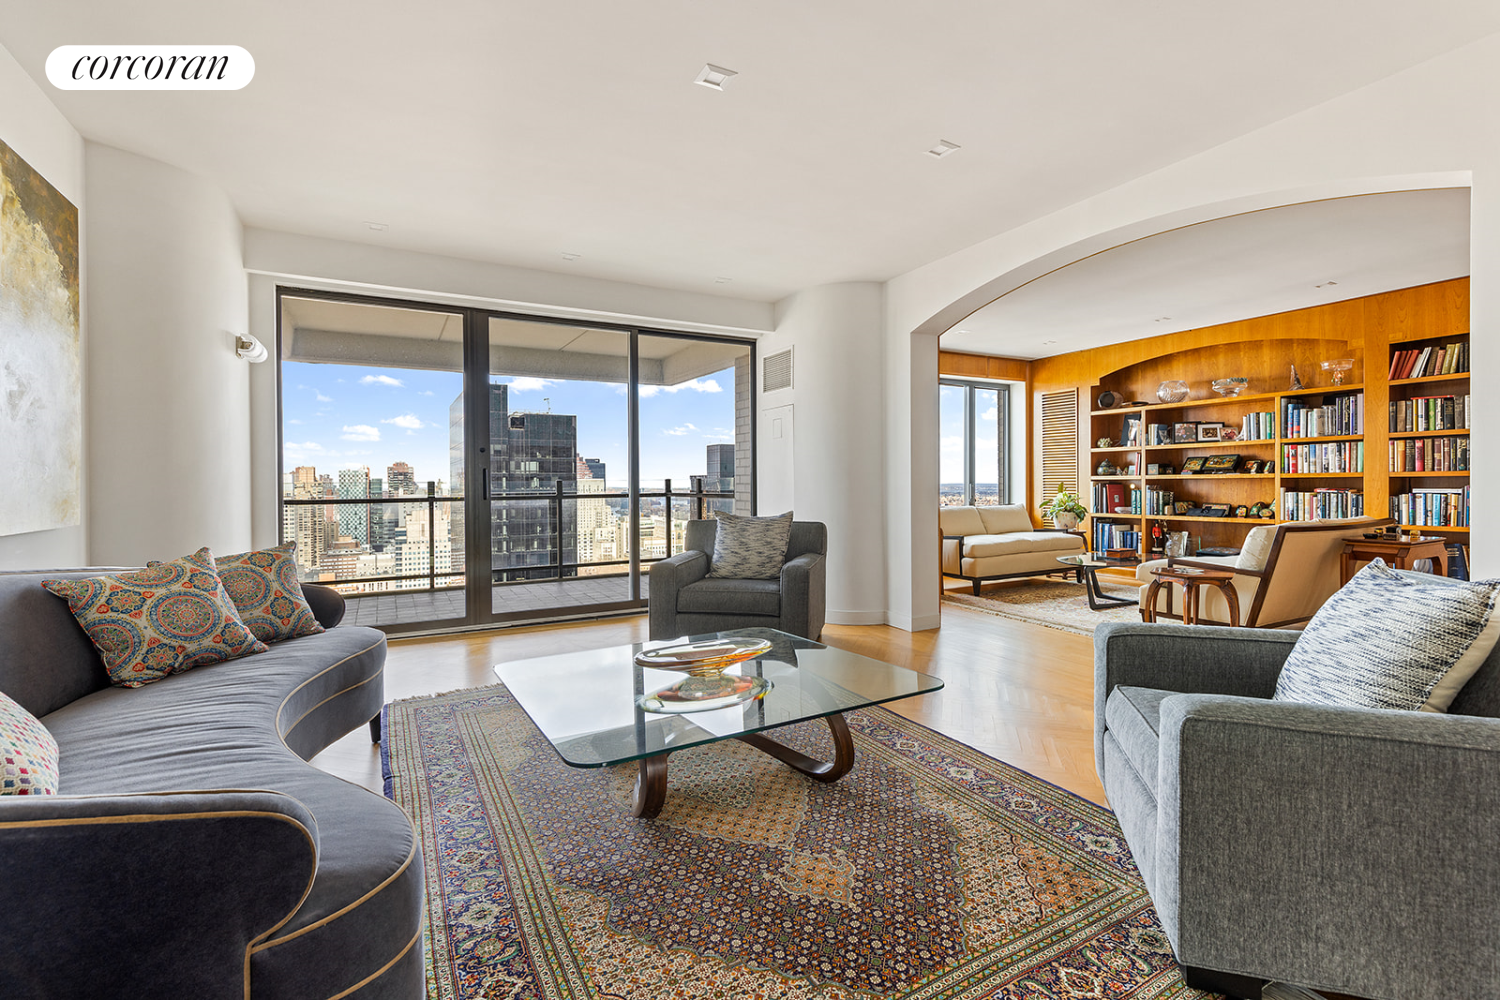 425 East 58th Street 36Ab, Sutton, Midtown East, NYC - 4 Bedrooms  
4.5 Bathrooms  
11 Rooms - 